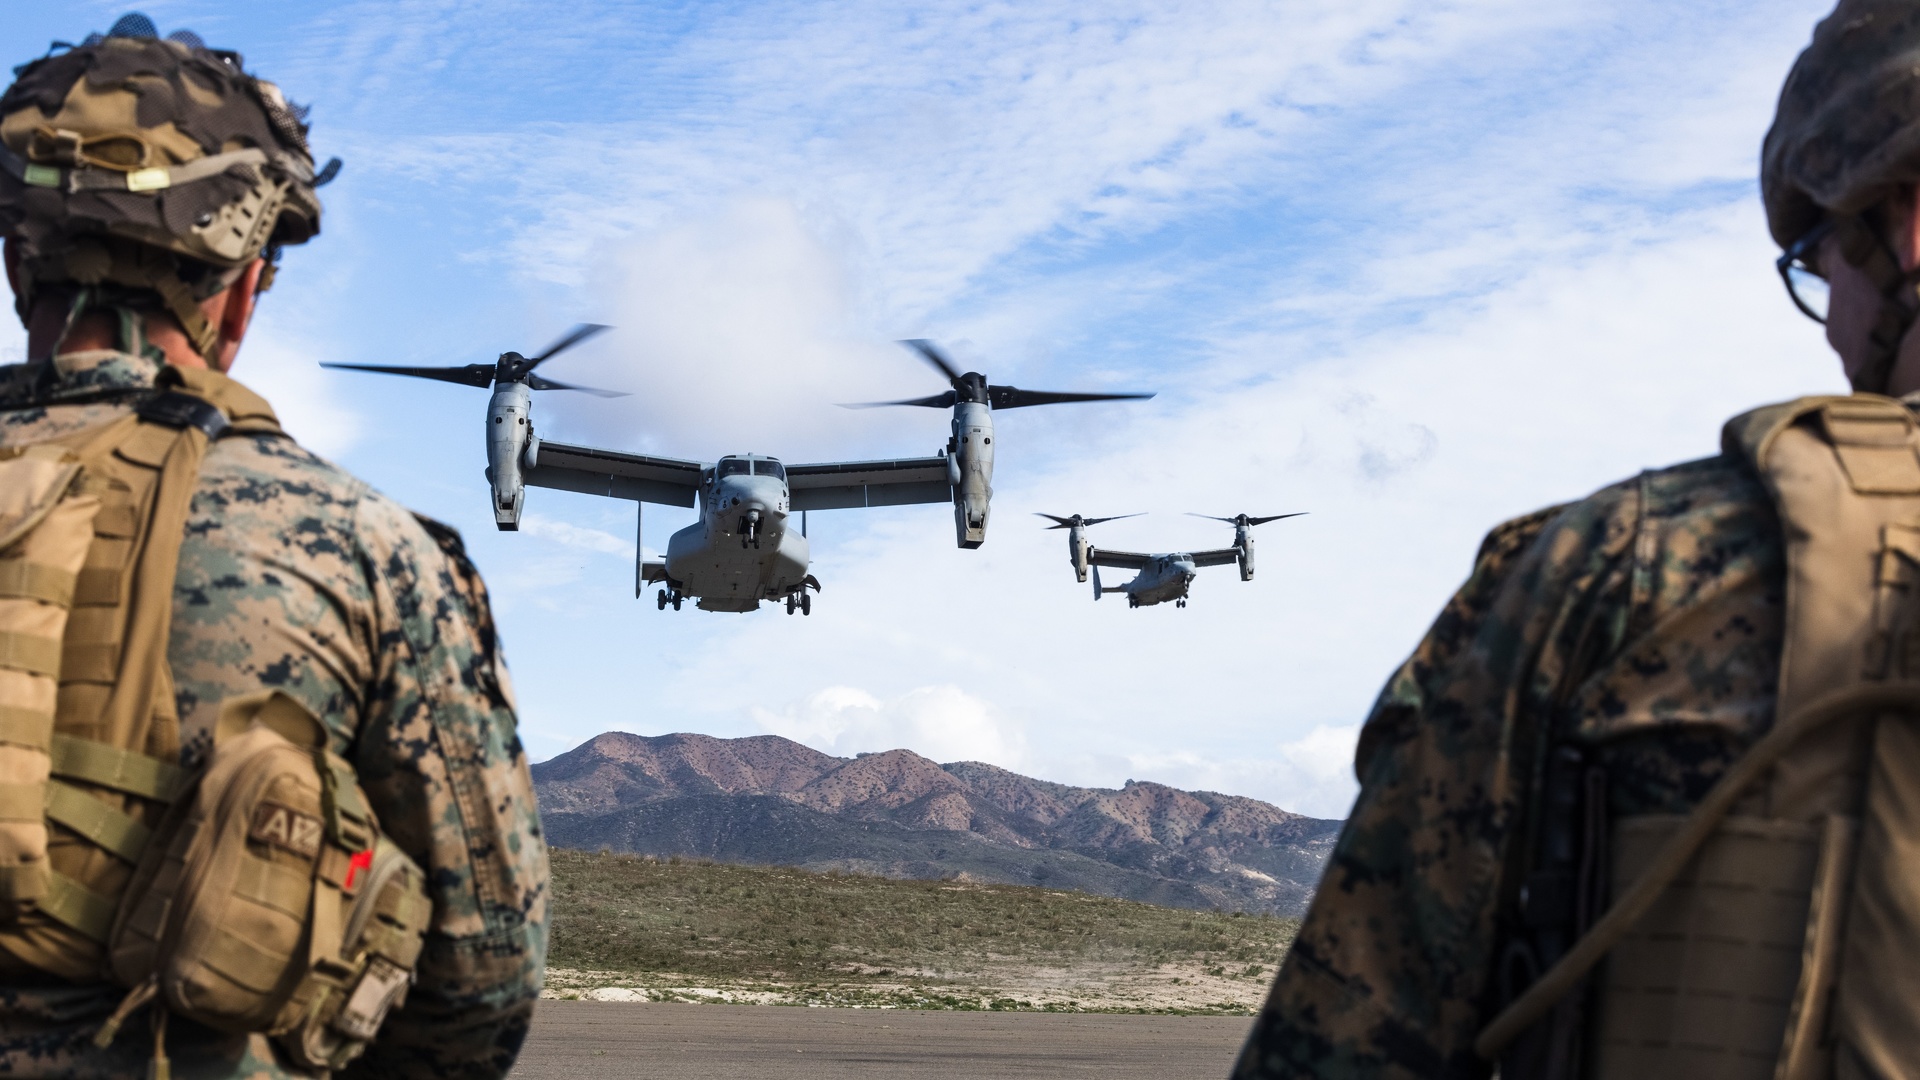 marine corps, bell boeing v-22 osprey, multi-mission tiltrotor military aircraft, california